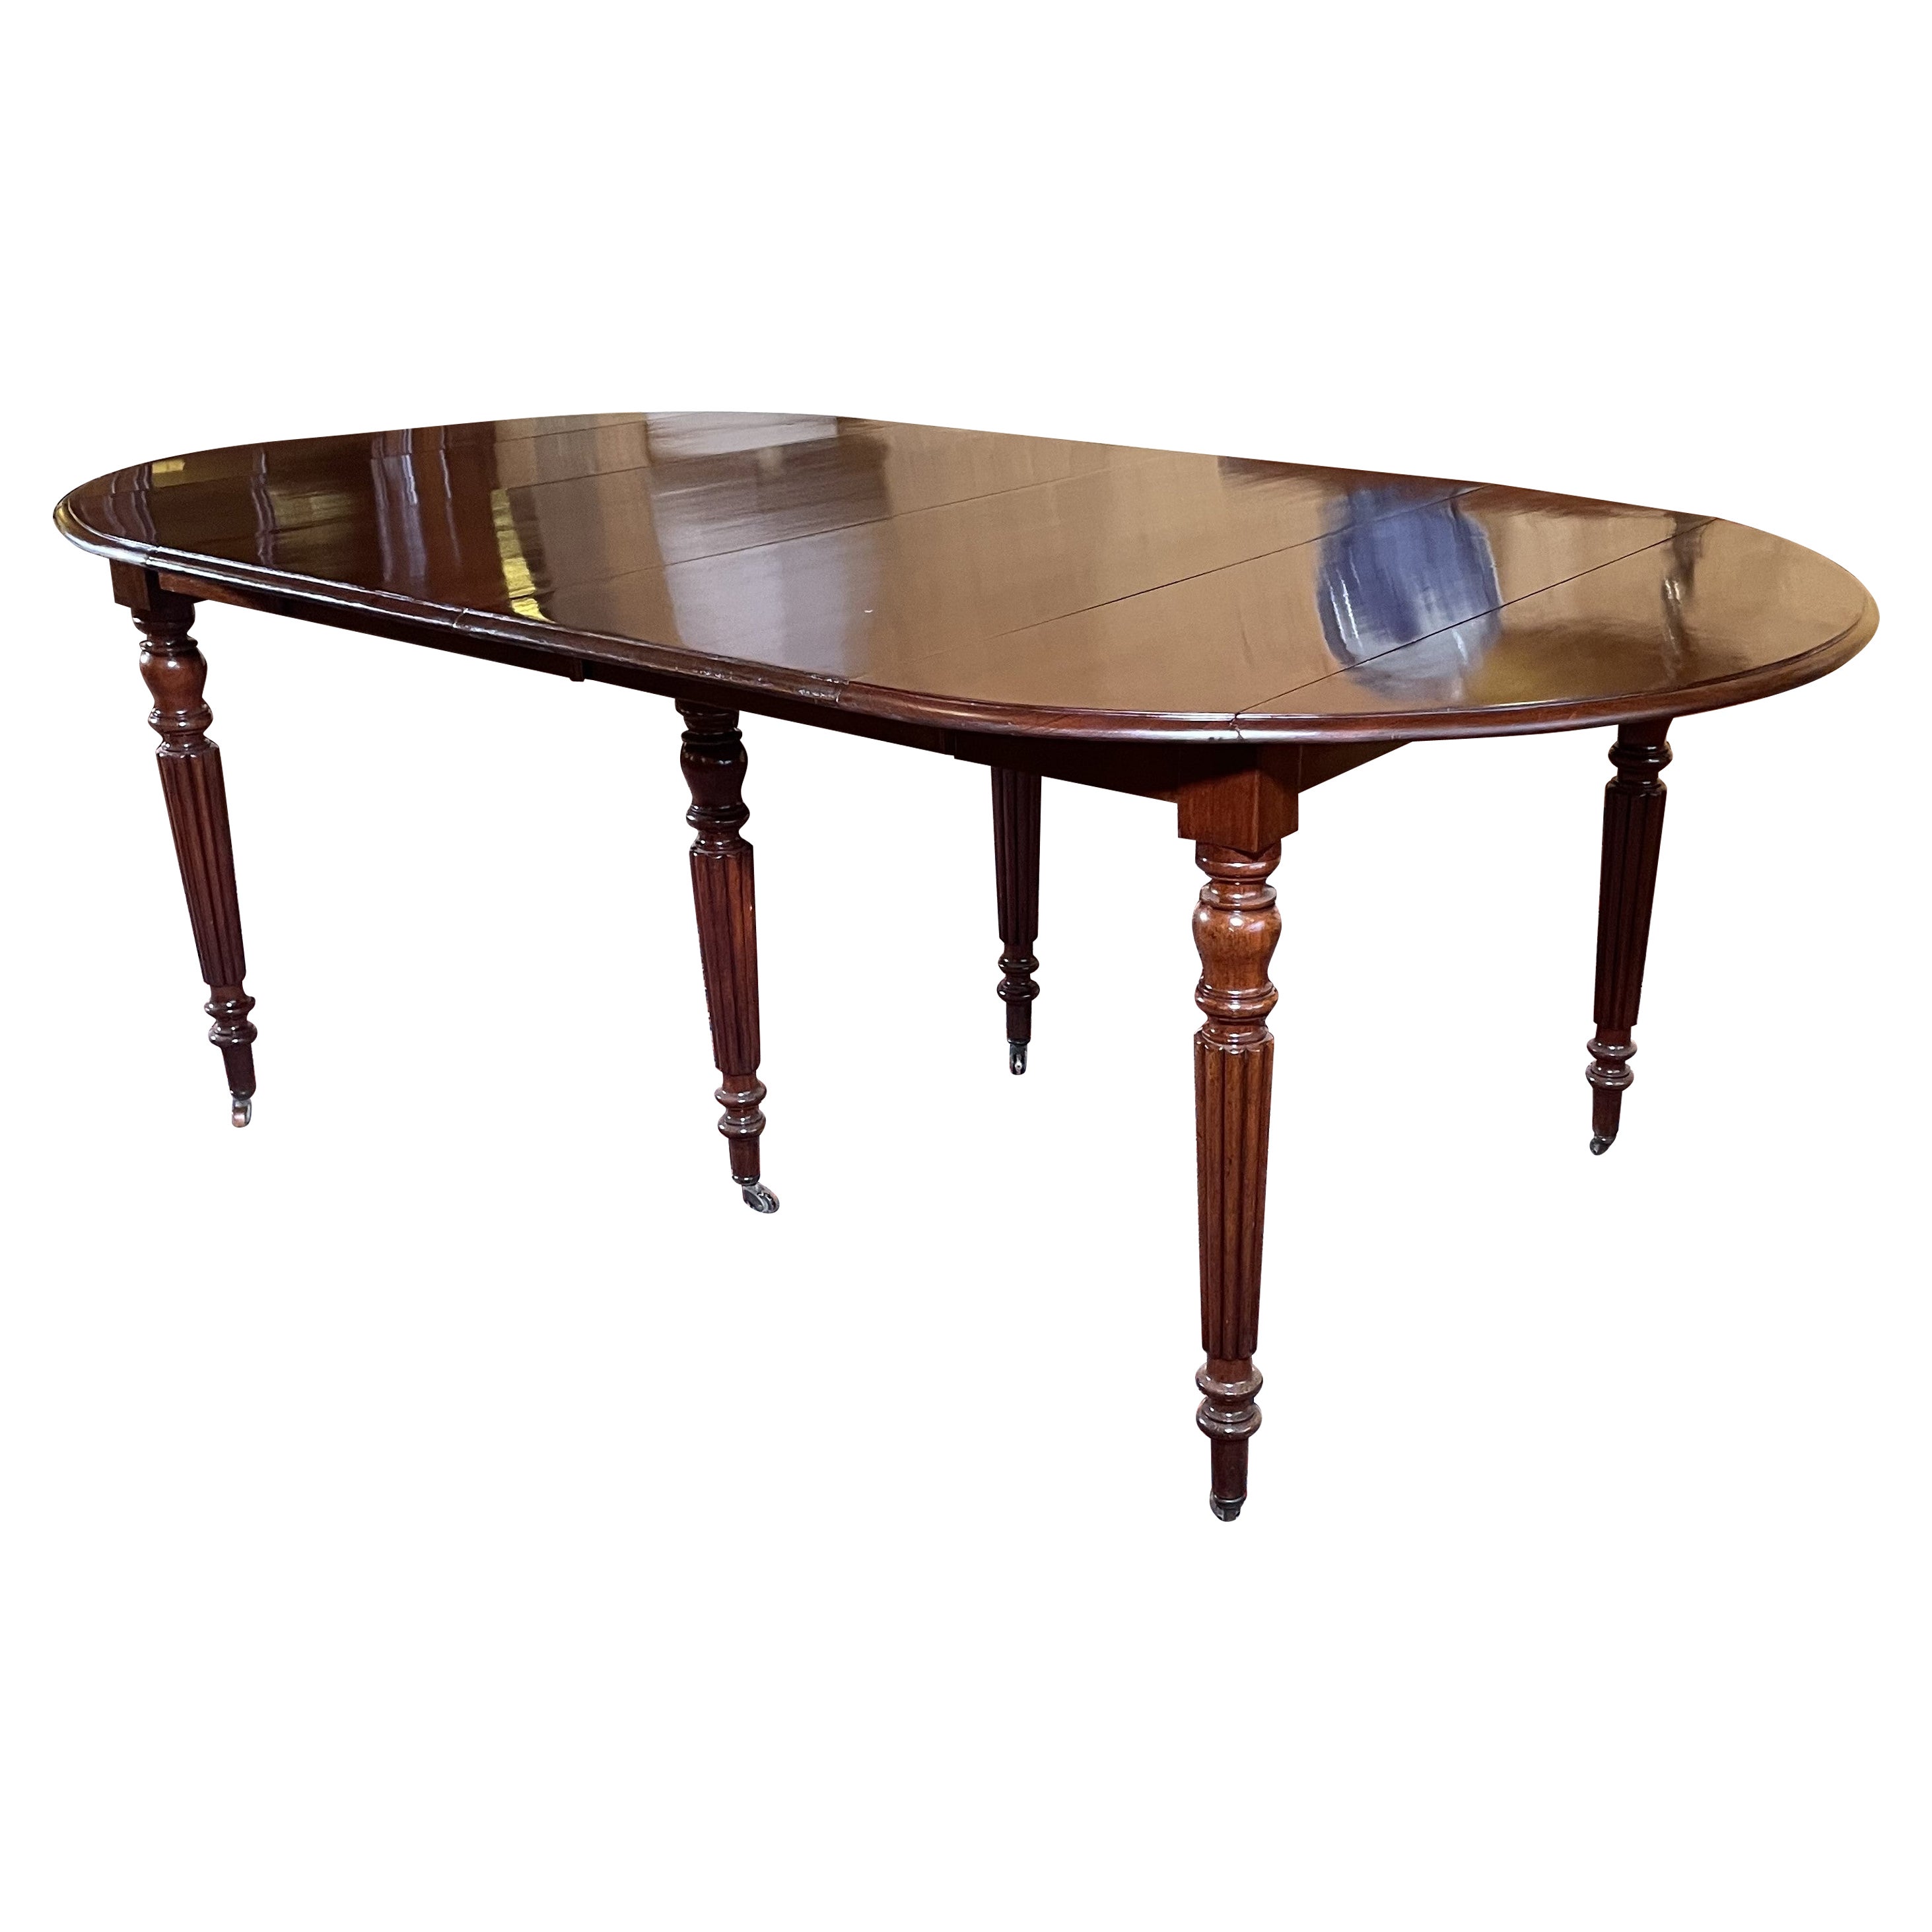 Mahogany Extending Table From The 19th Century